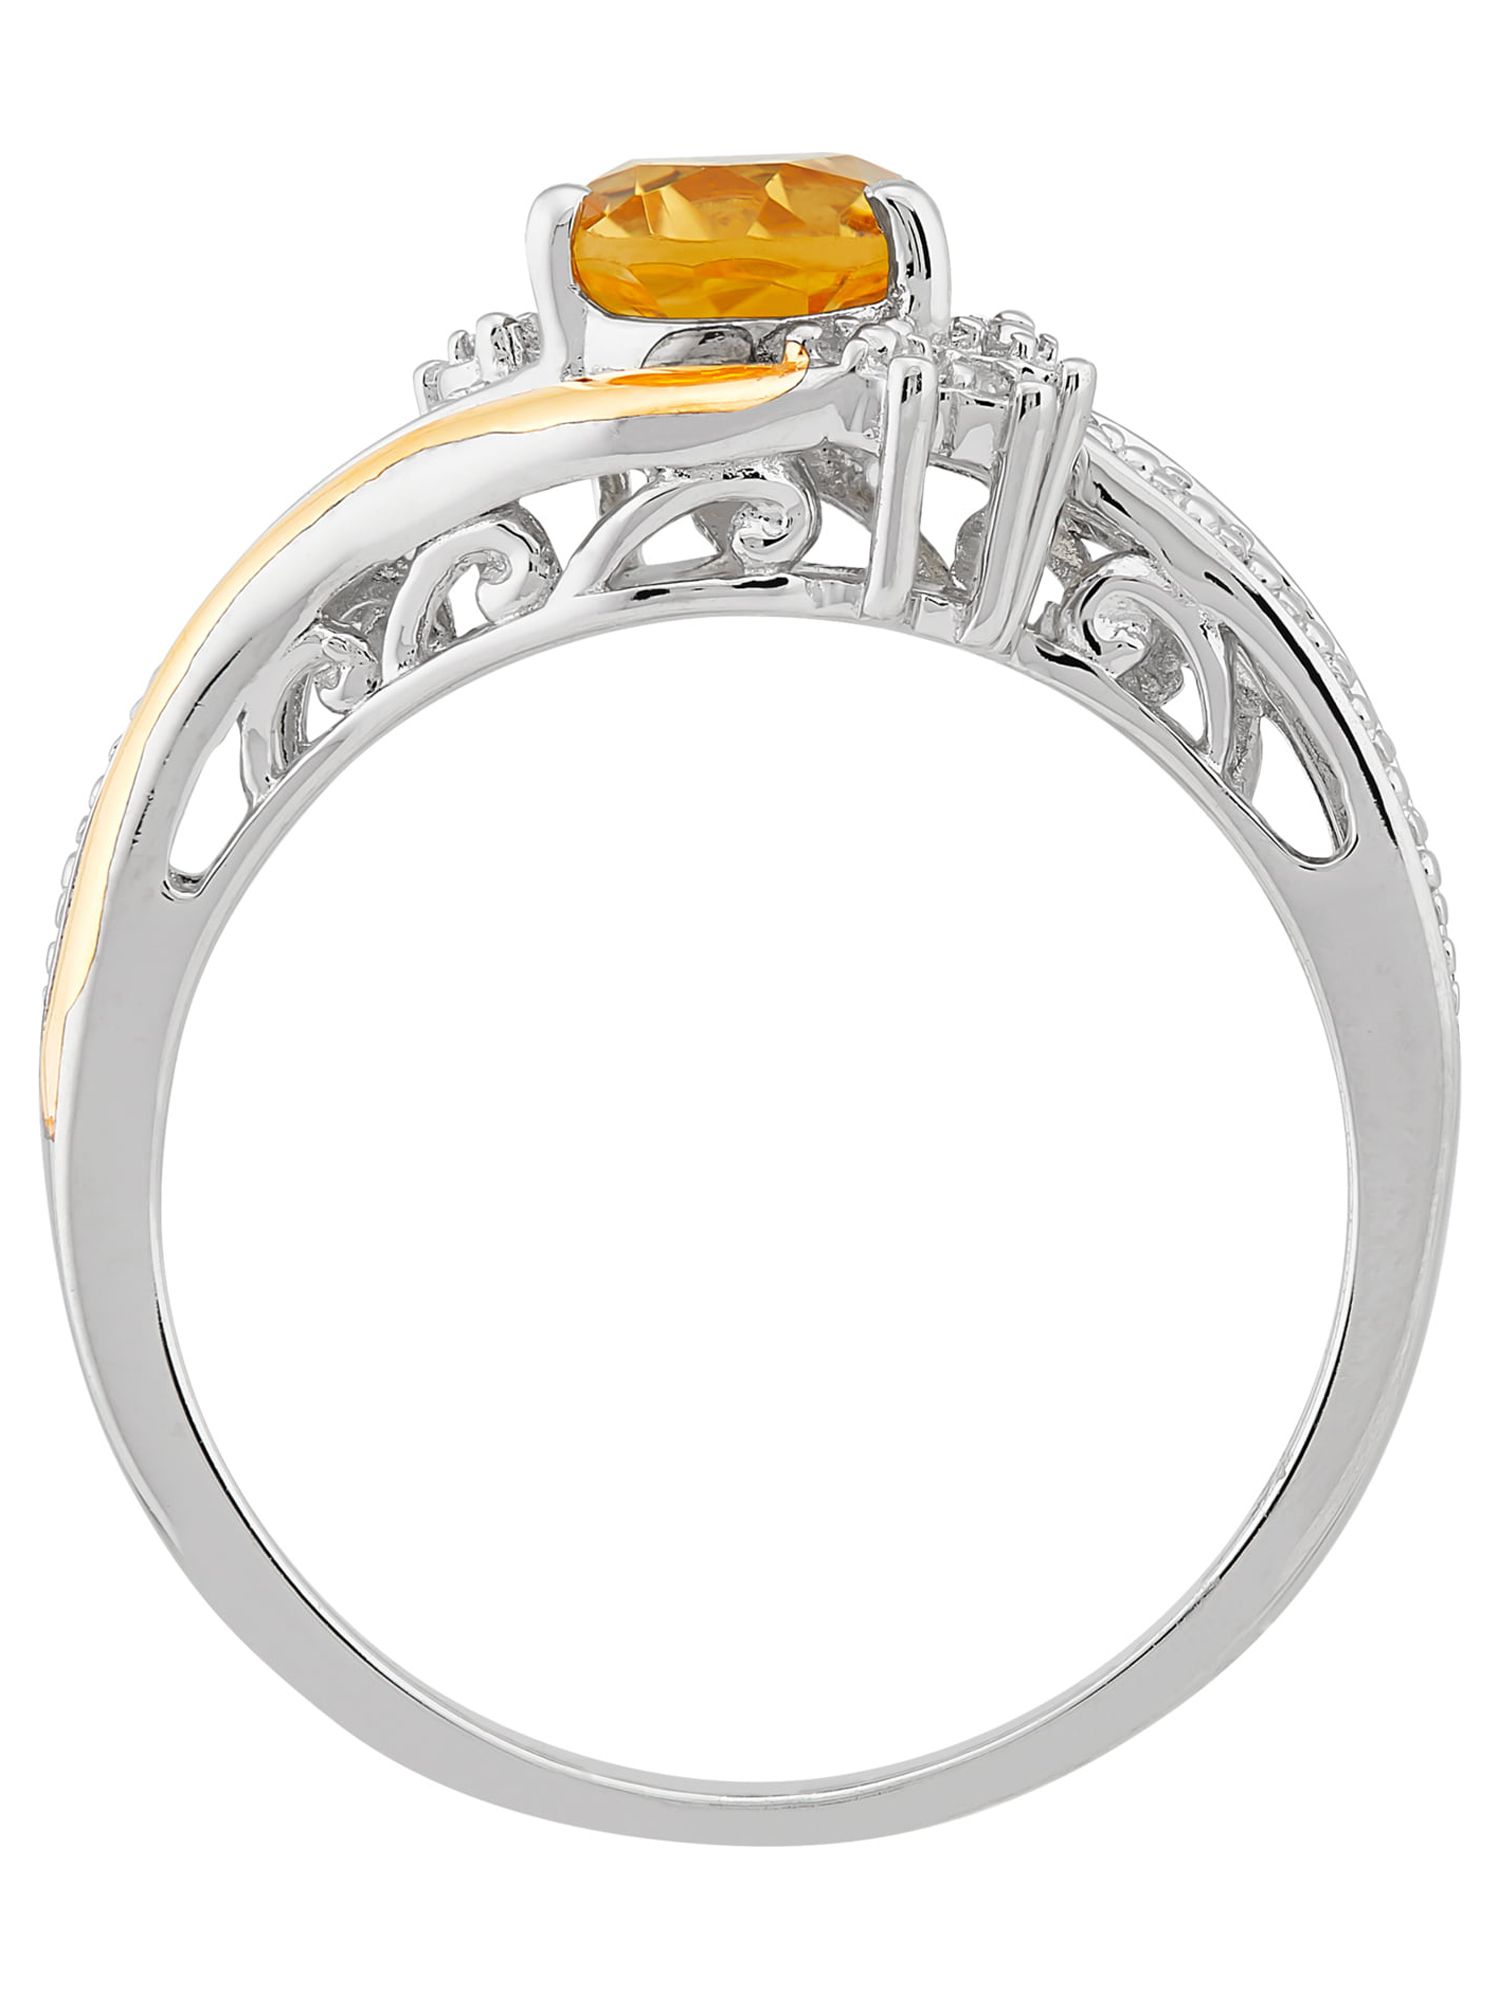 Brilliance Fine Jewelry Genuine Citrine Diamond Accent Ring in Sterling Silver and 10K Yellow Gold - image 2 of 4